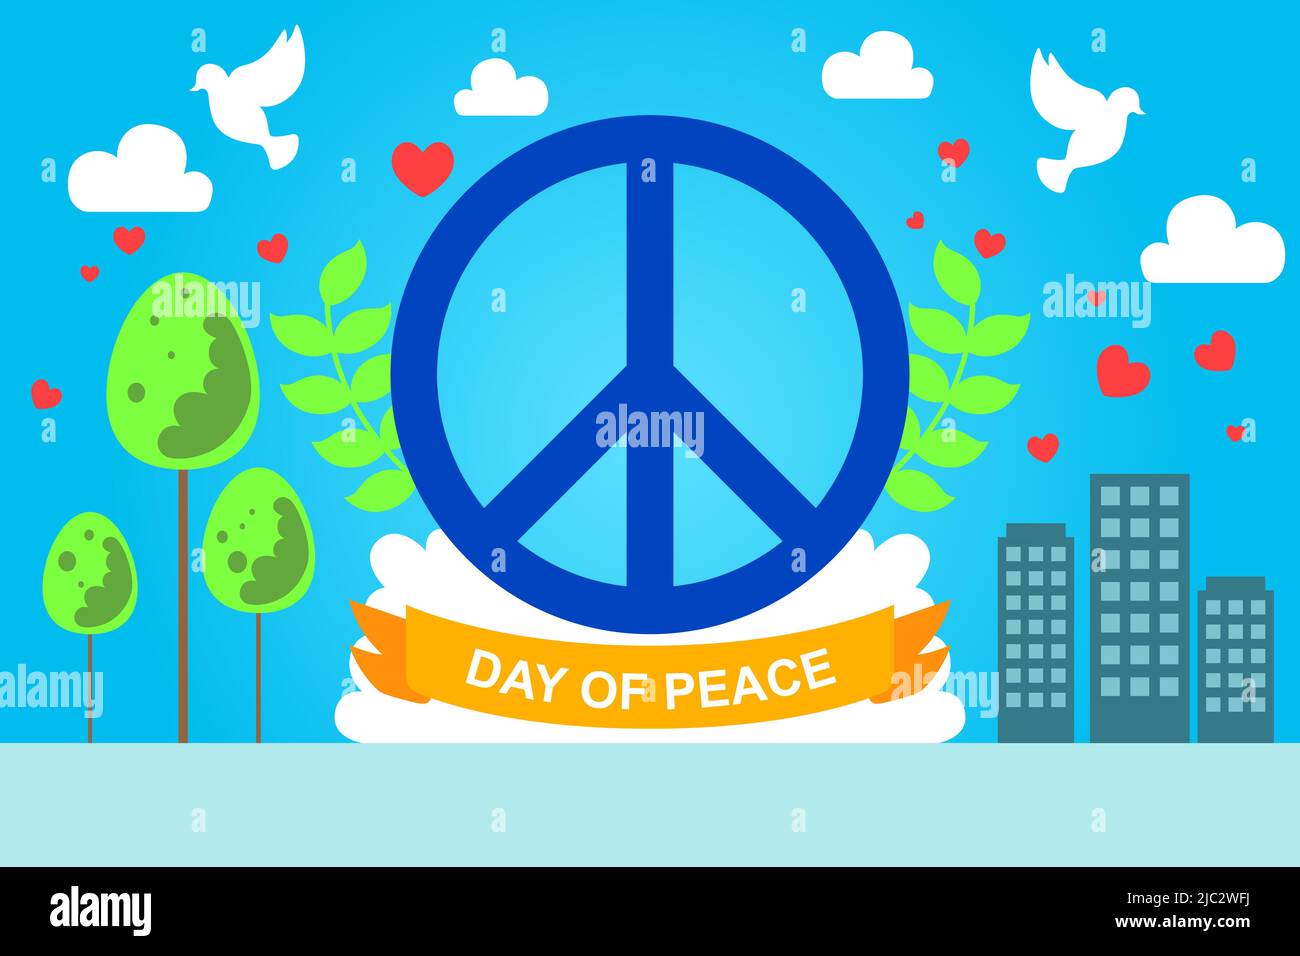 A vector illustration of Peace Concept Stock Vector